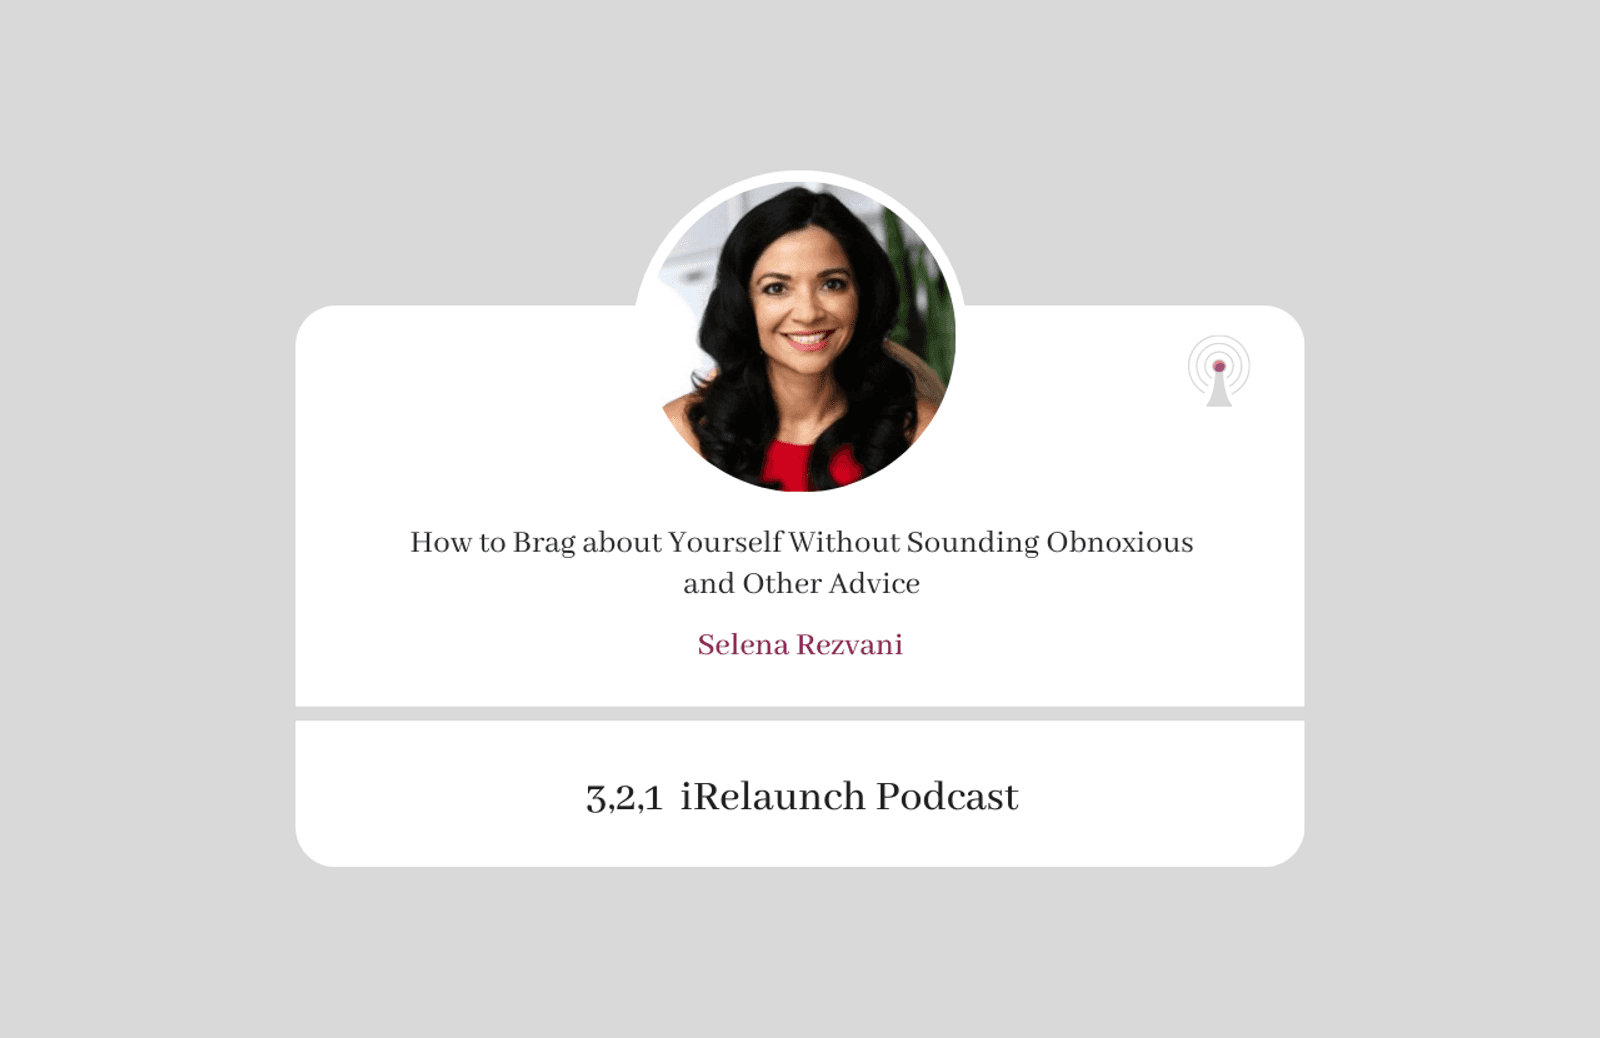 3, 2, 1 iRelaunch Podcast Thumbnail for Episode #146 with Selena Rezvani's headshot. The episode's title is: "How to Brag about Yourself Without Sounding Obnoxious and Other Advice."